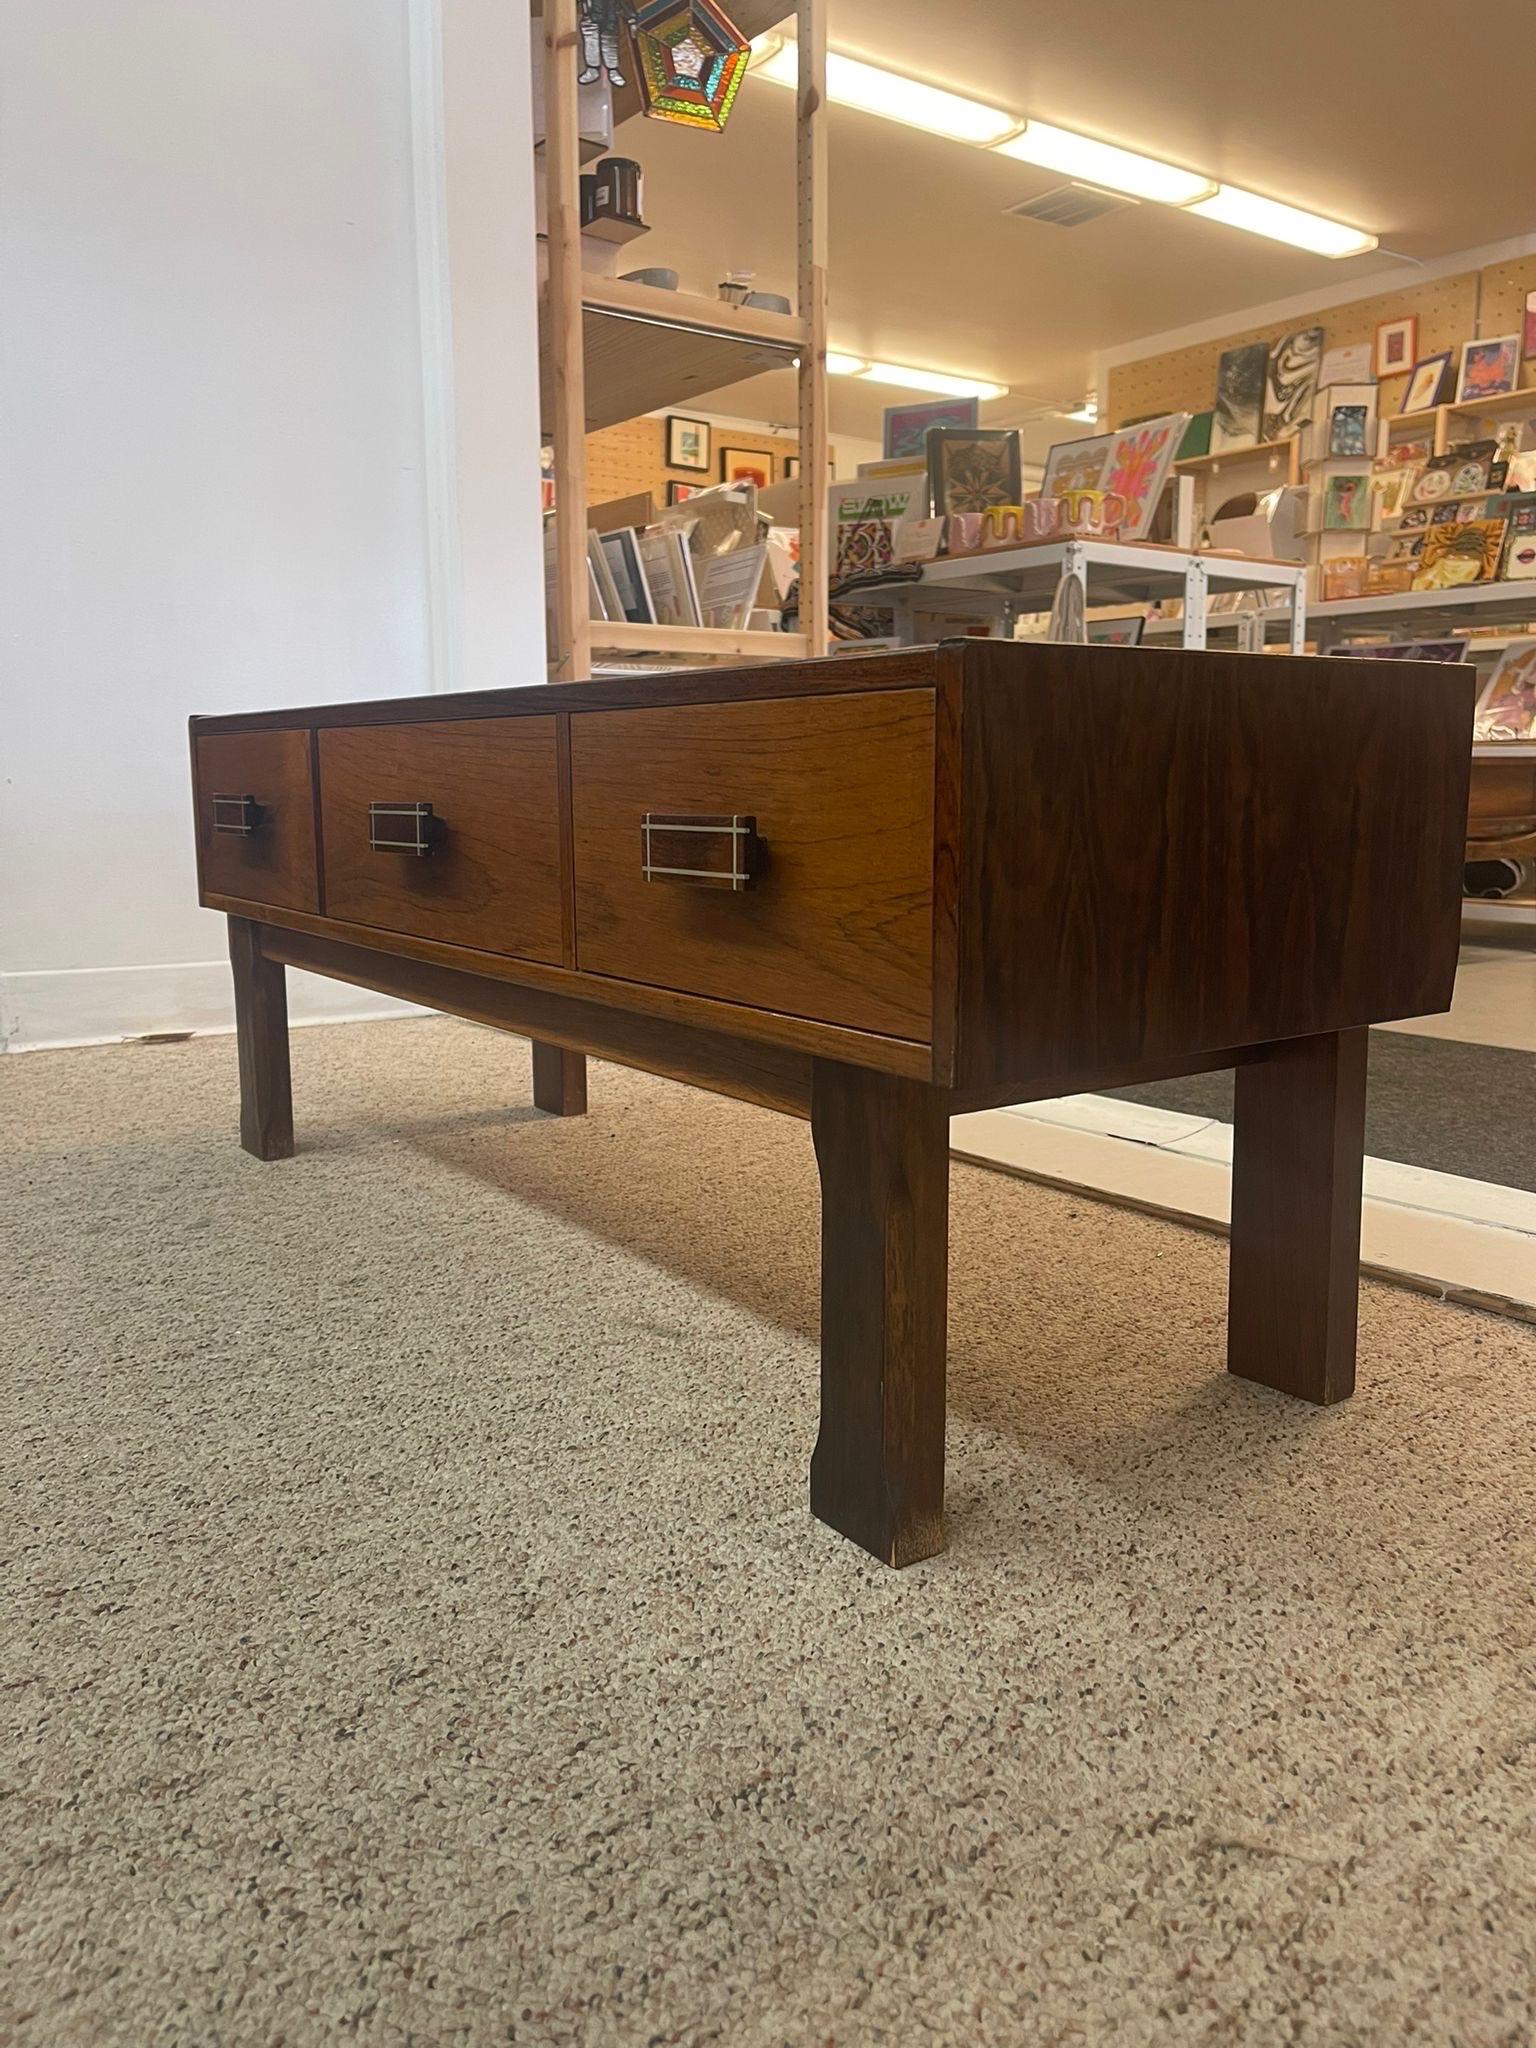 This Table features wood inlay accents on each of the three drawer pulls. Beautiful wood grain throughout. Imported From Denmark.Vintage Condition Consistent with Age as Pictured.

Dimensions. 43 W ; 14 D ; 16 1/2 H